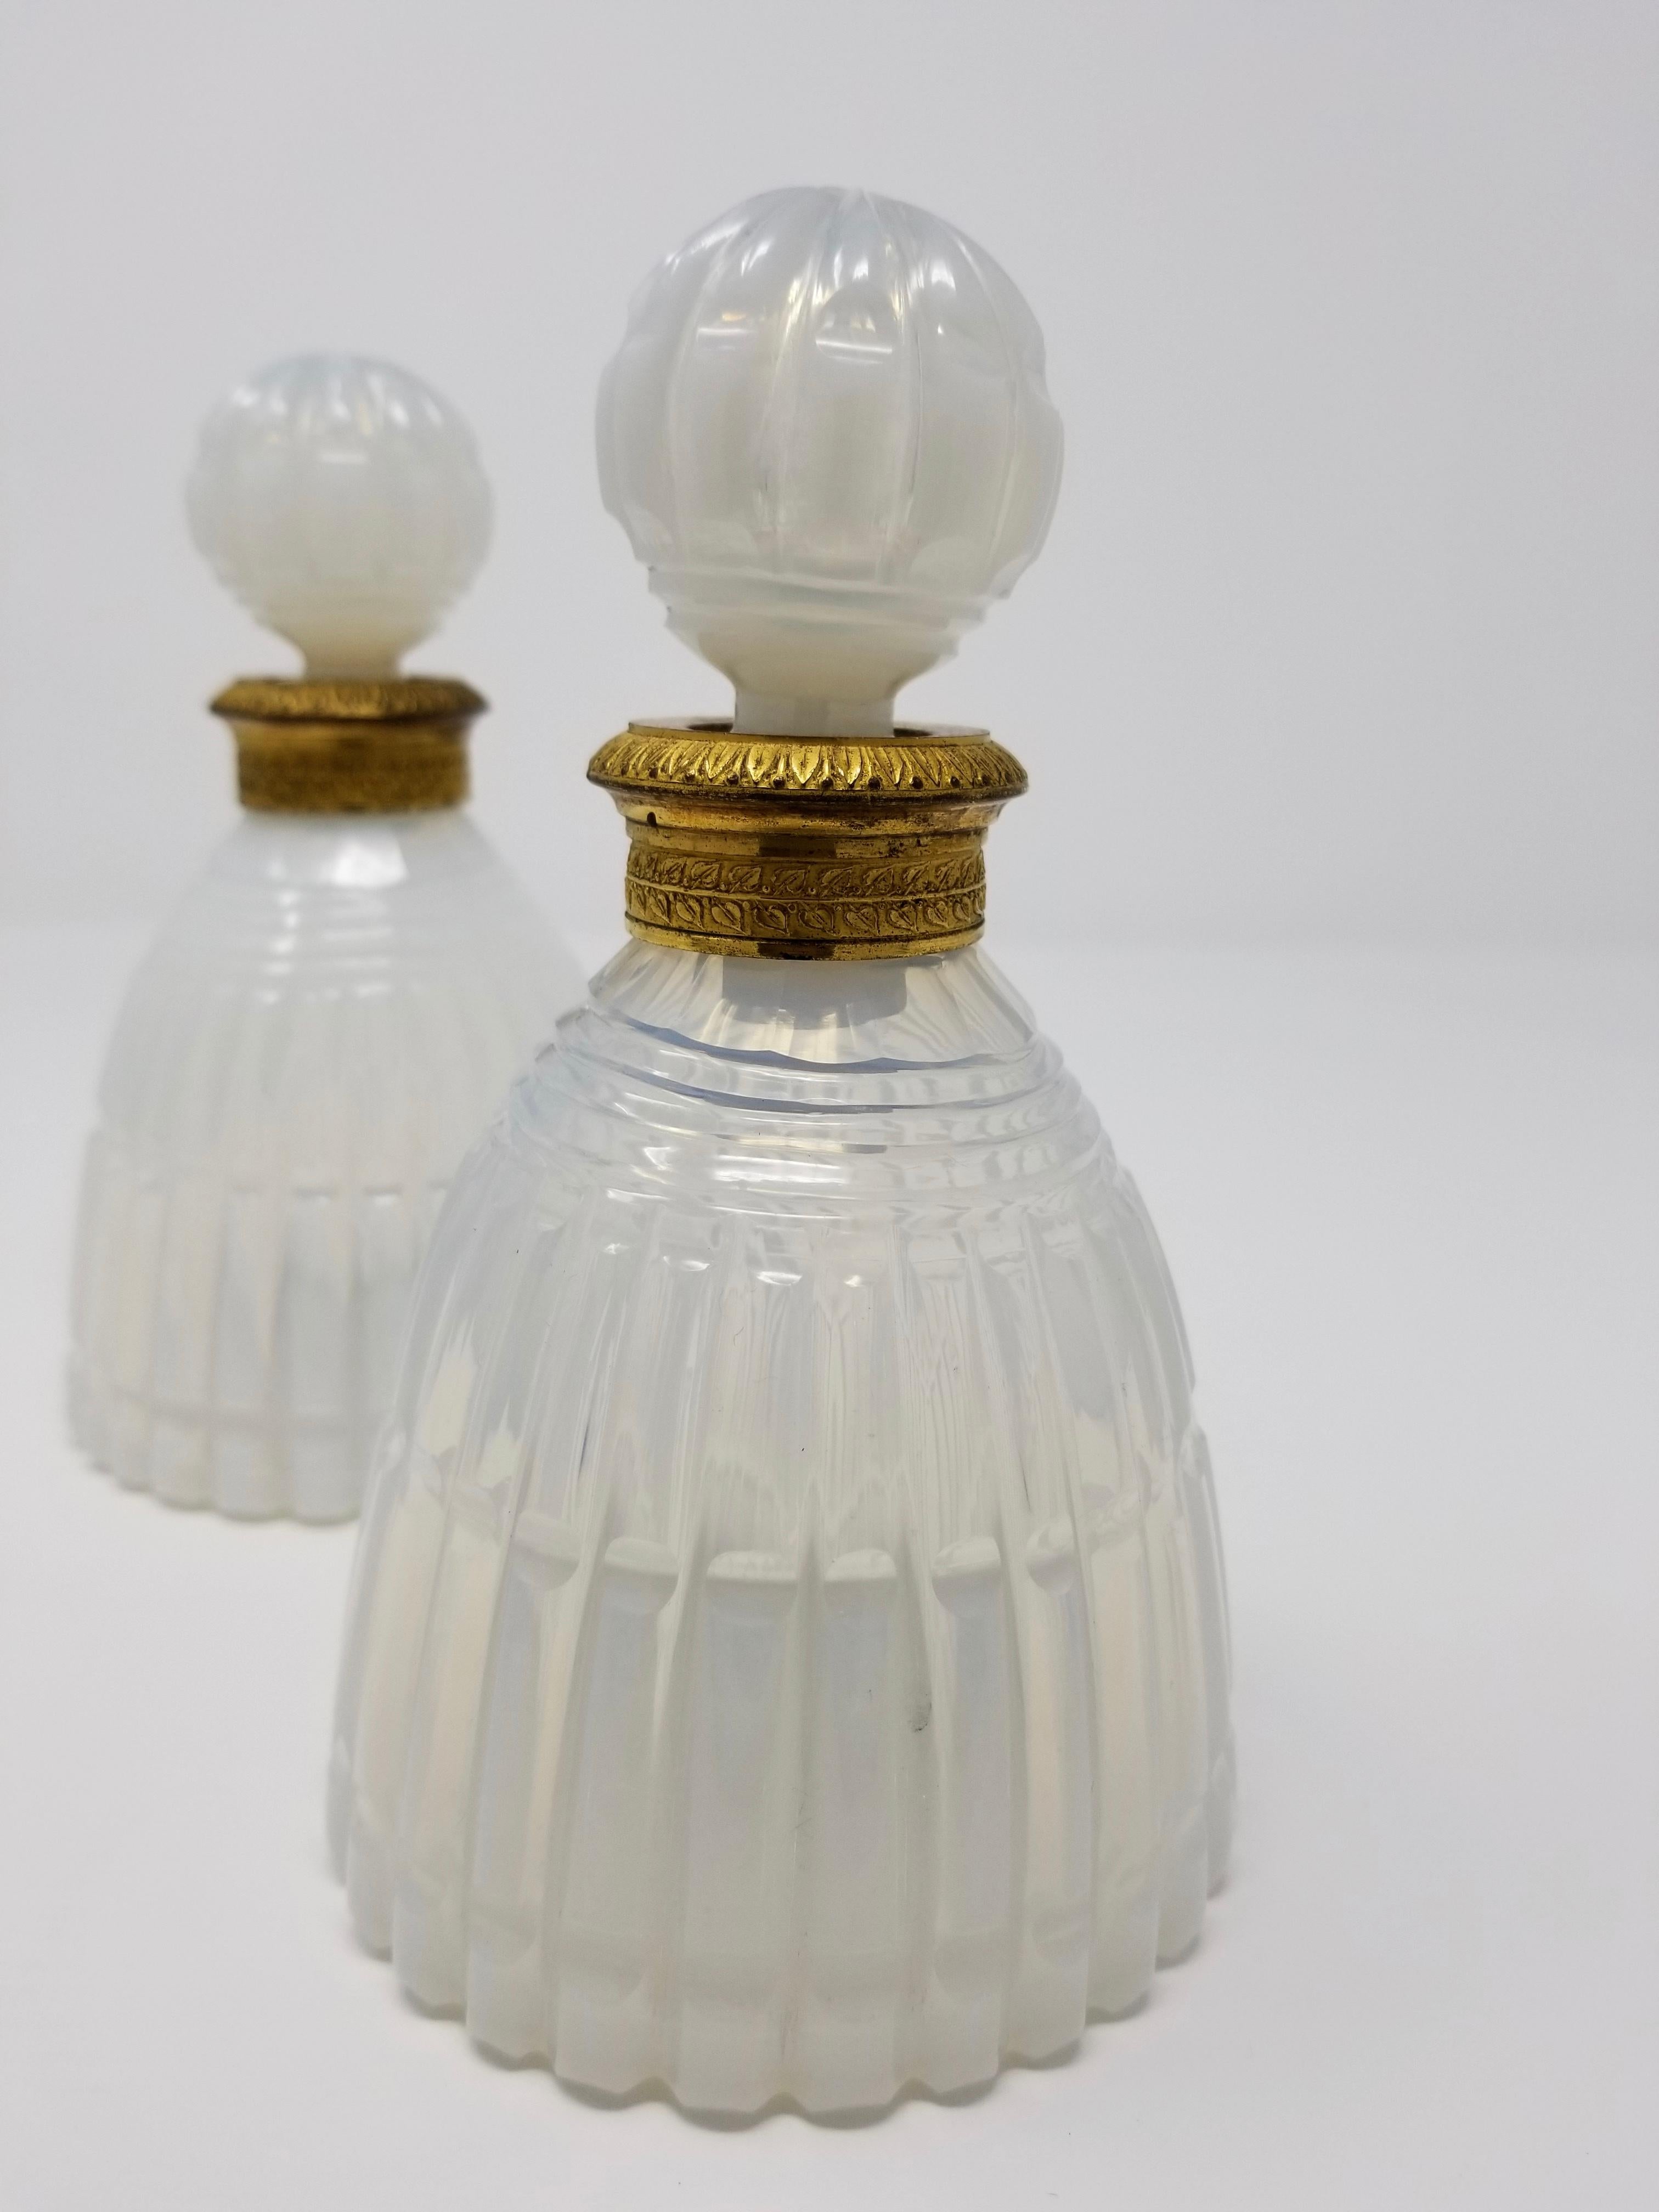 A fine pair of 19th century Louis XVI style Russian hand diamond-cut white opalescent crystal and ormolu-mounted perfume bottles. This pair of hand diamond-cut crystal perfume bottles are truly beautiful. The crystal has a gorgeous milky-white